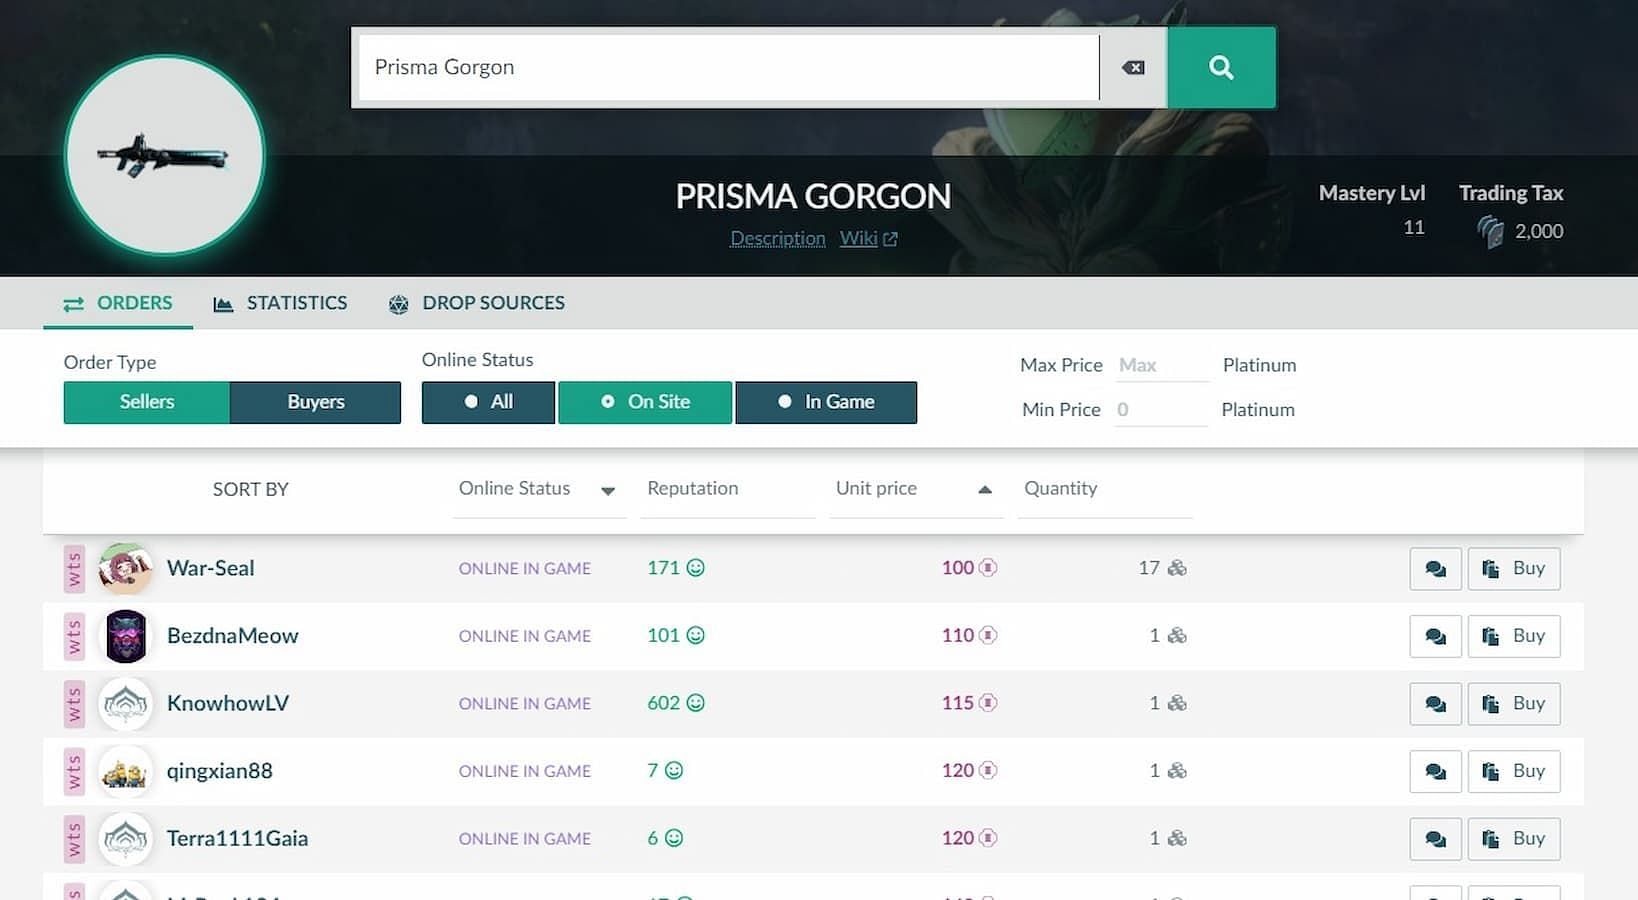 Selling Prisma and Wraith weapons is a Platinum-farming way preferred by patient Warframe players (Image via Warframe Market)